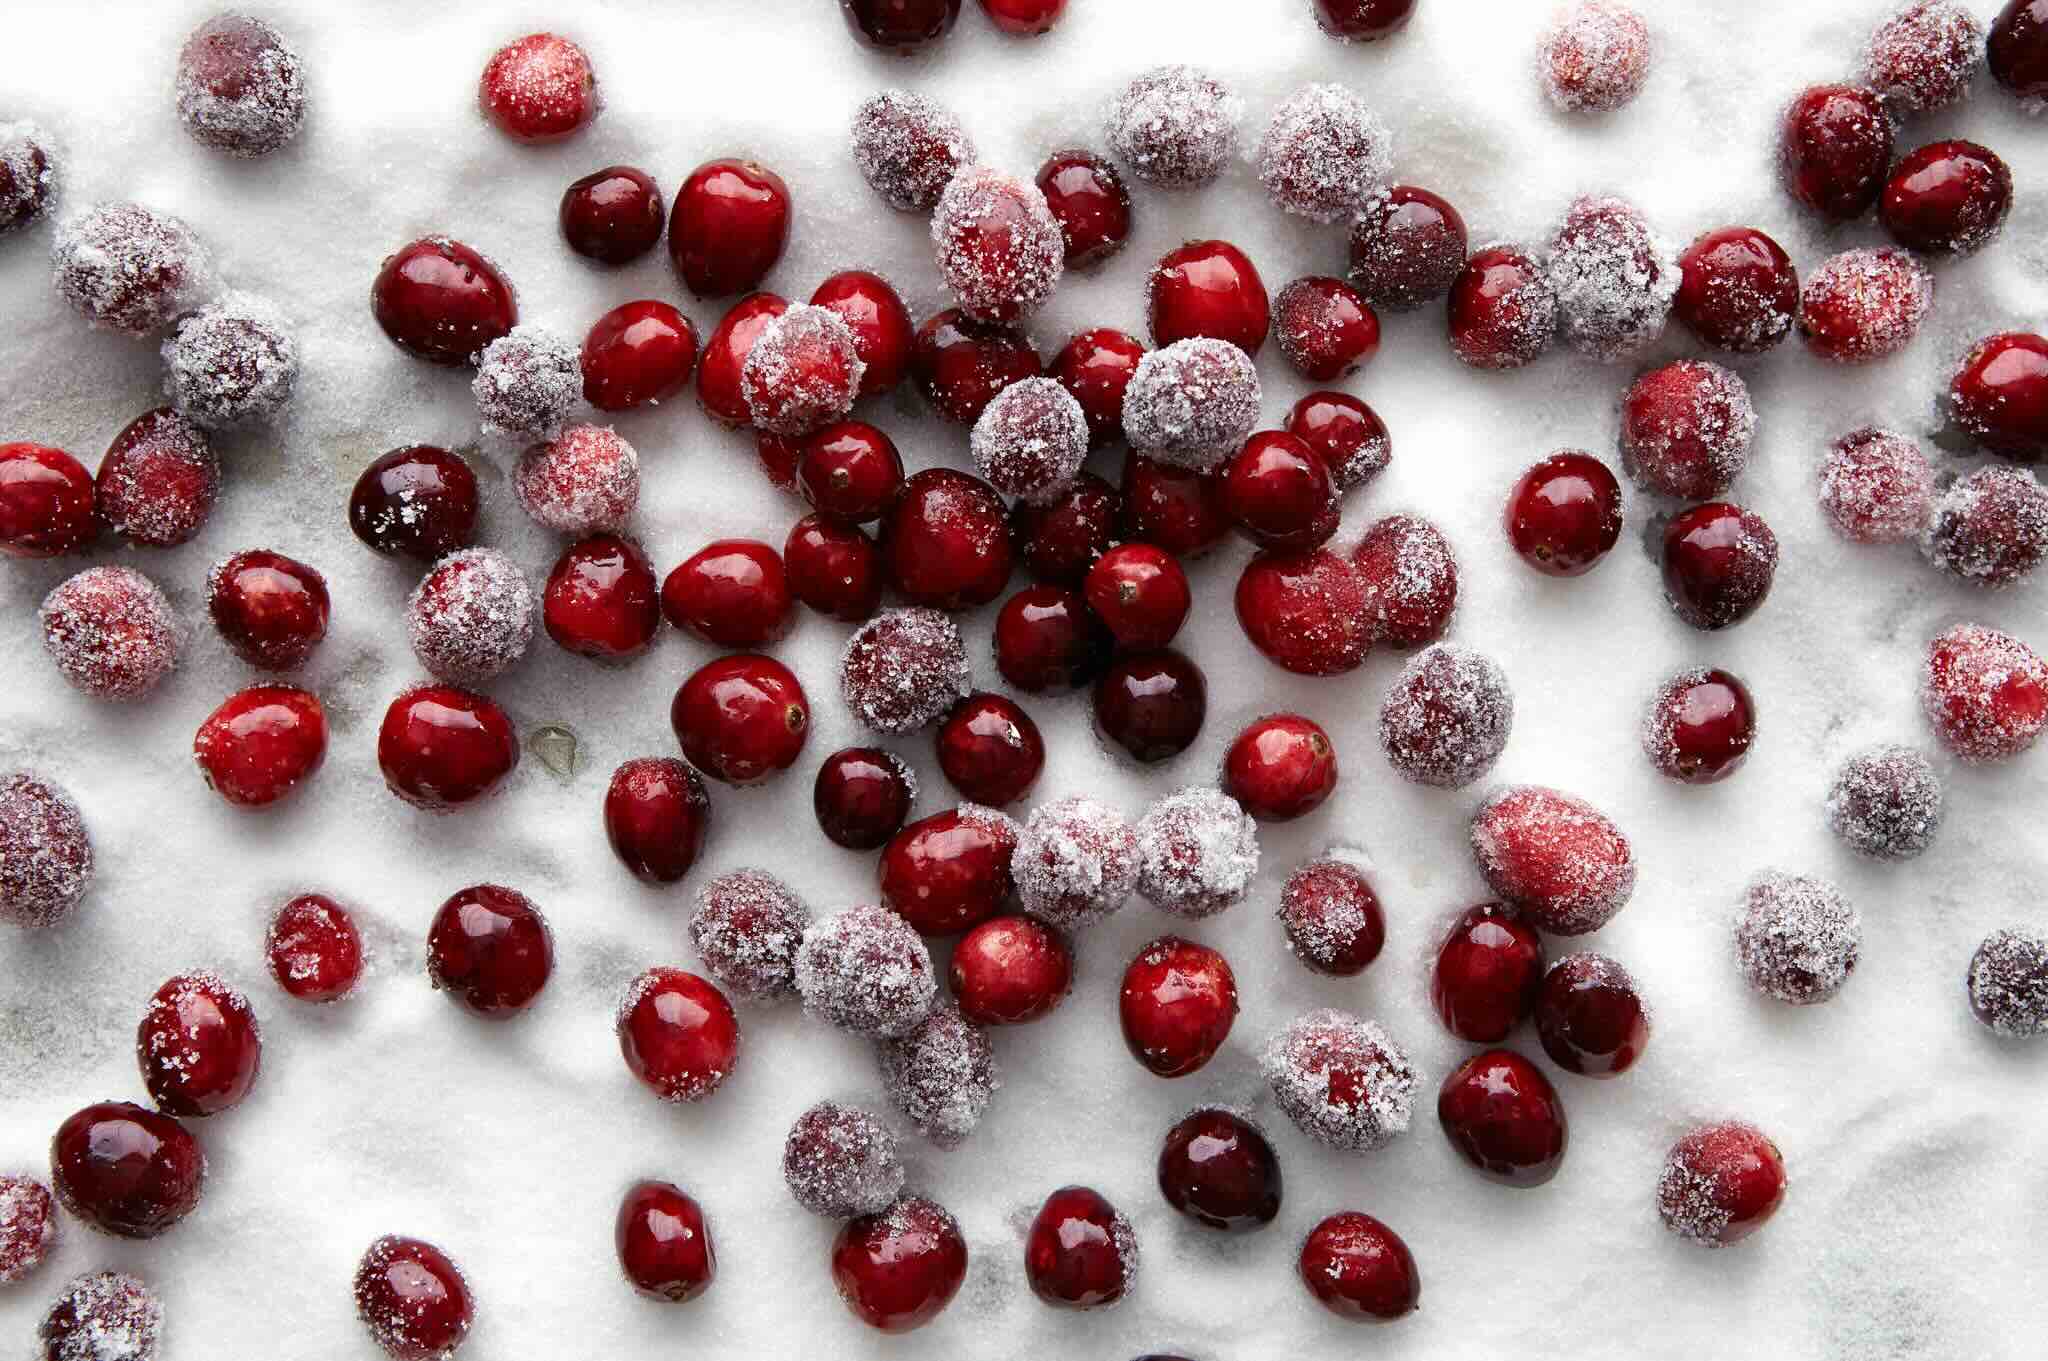 How To Store Sugared Cranberries